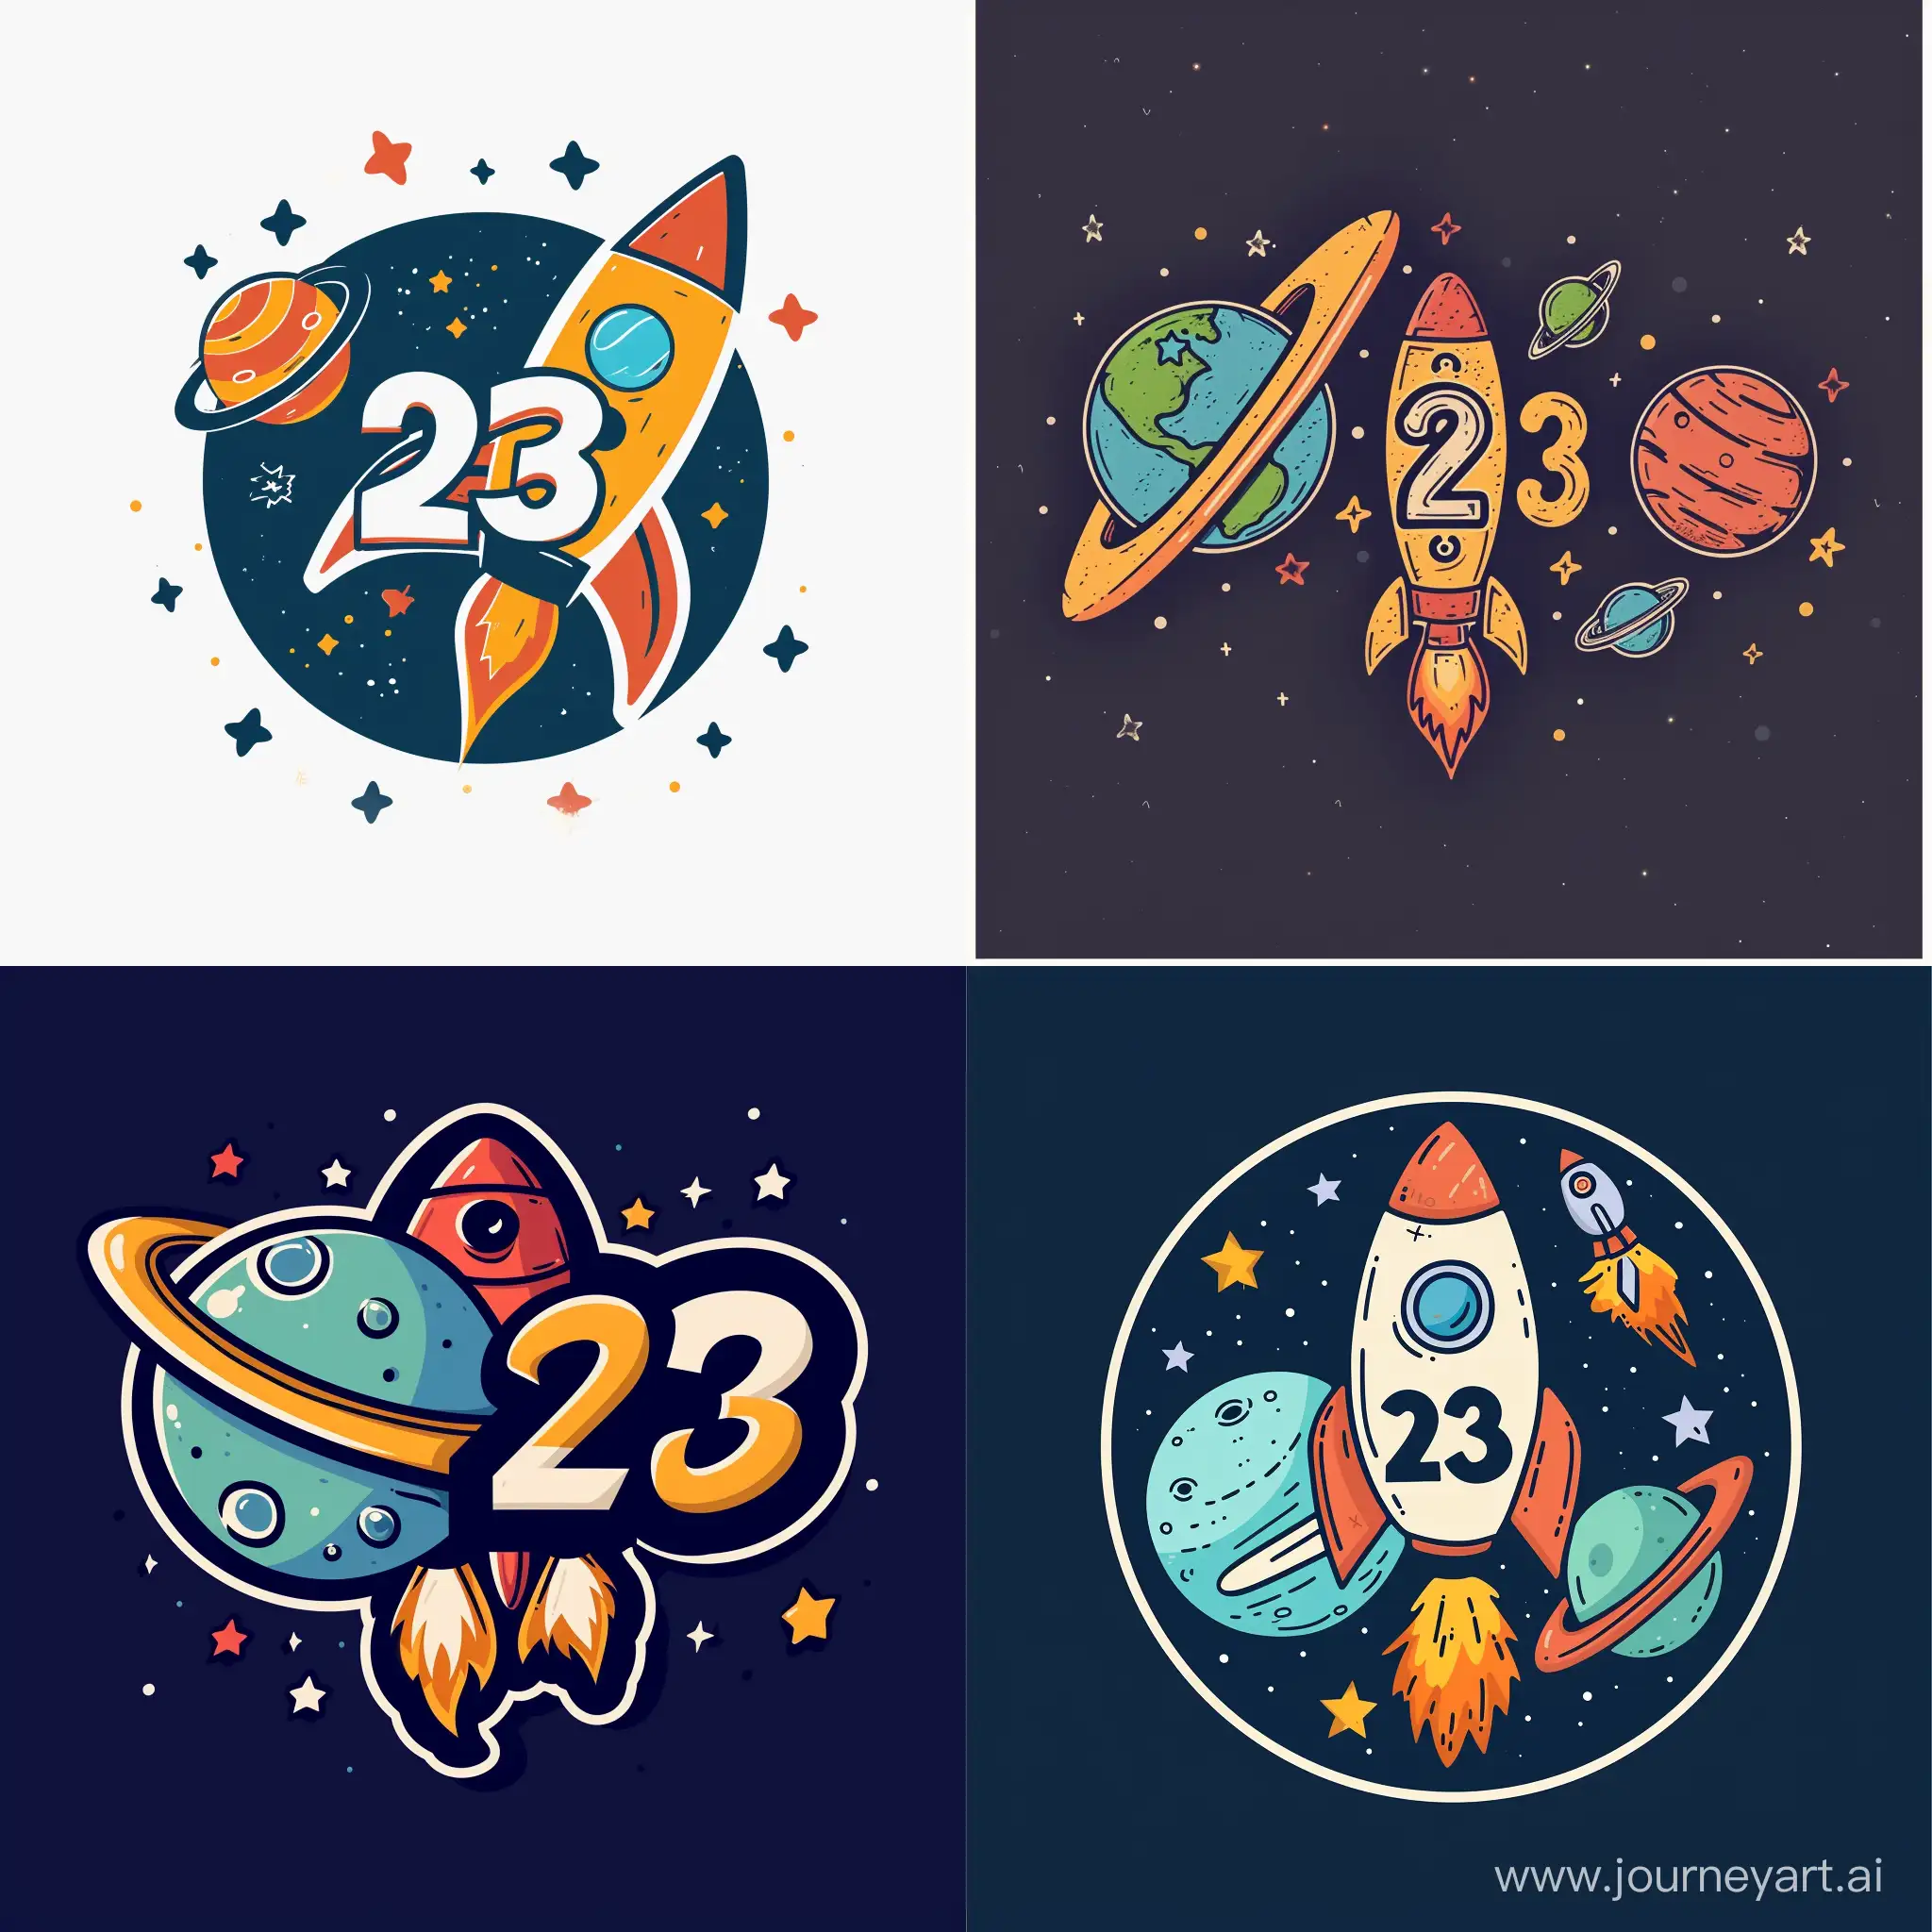 Modern-Spacethemed-Educational-Institution-Logo-with-Number-23-Planet-and-Rocket